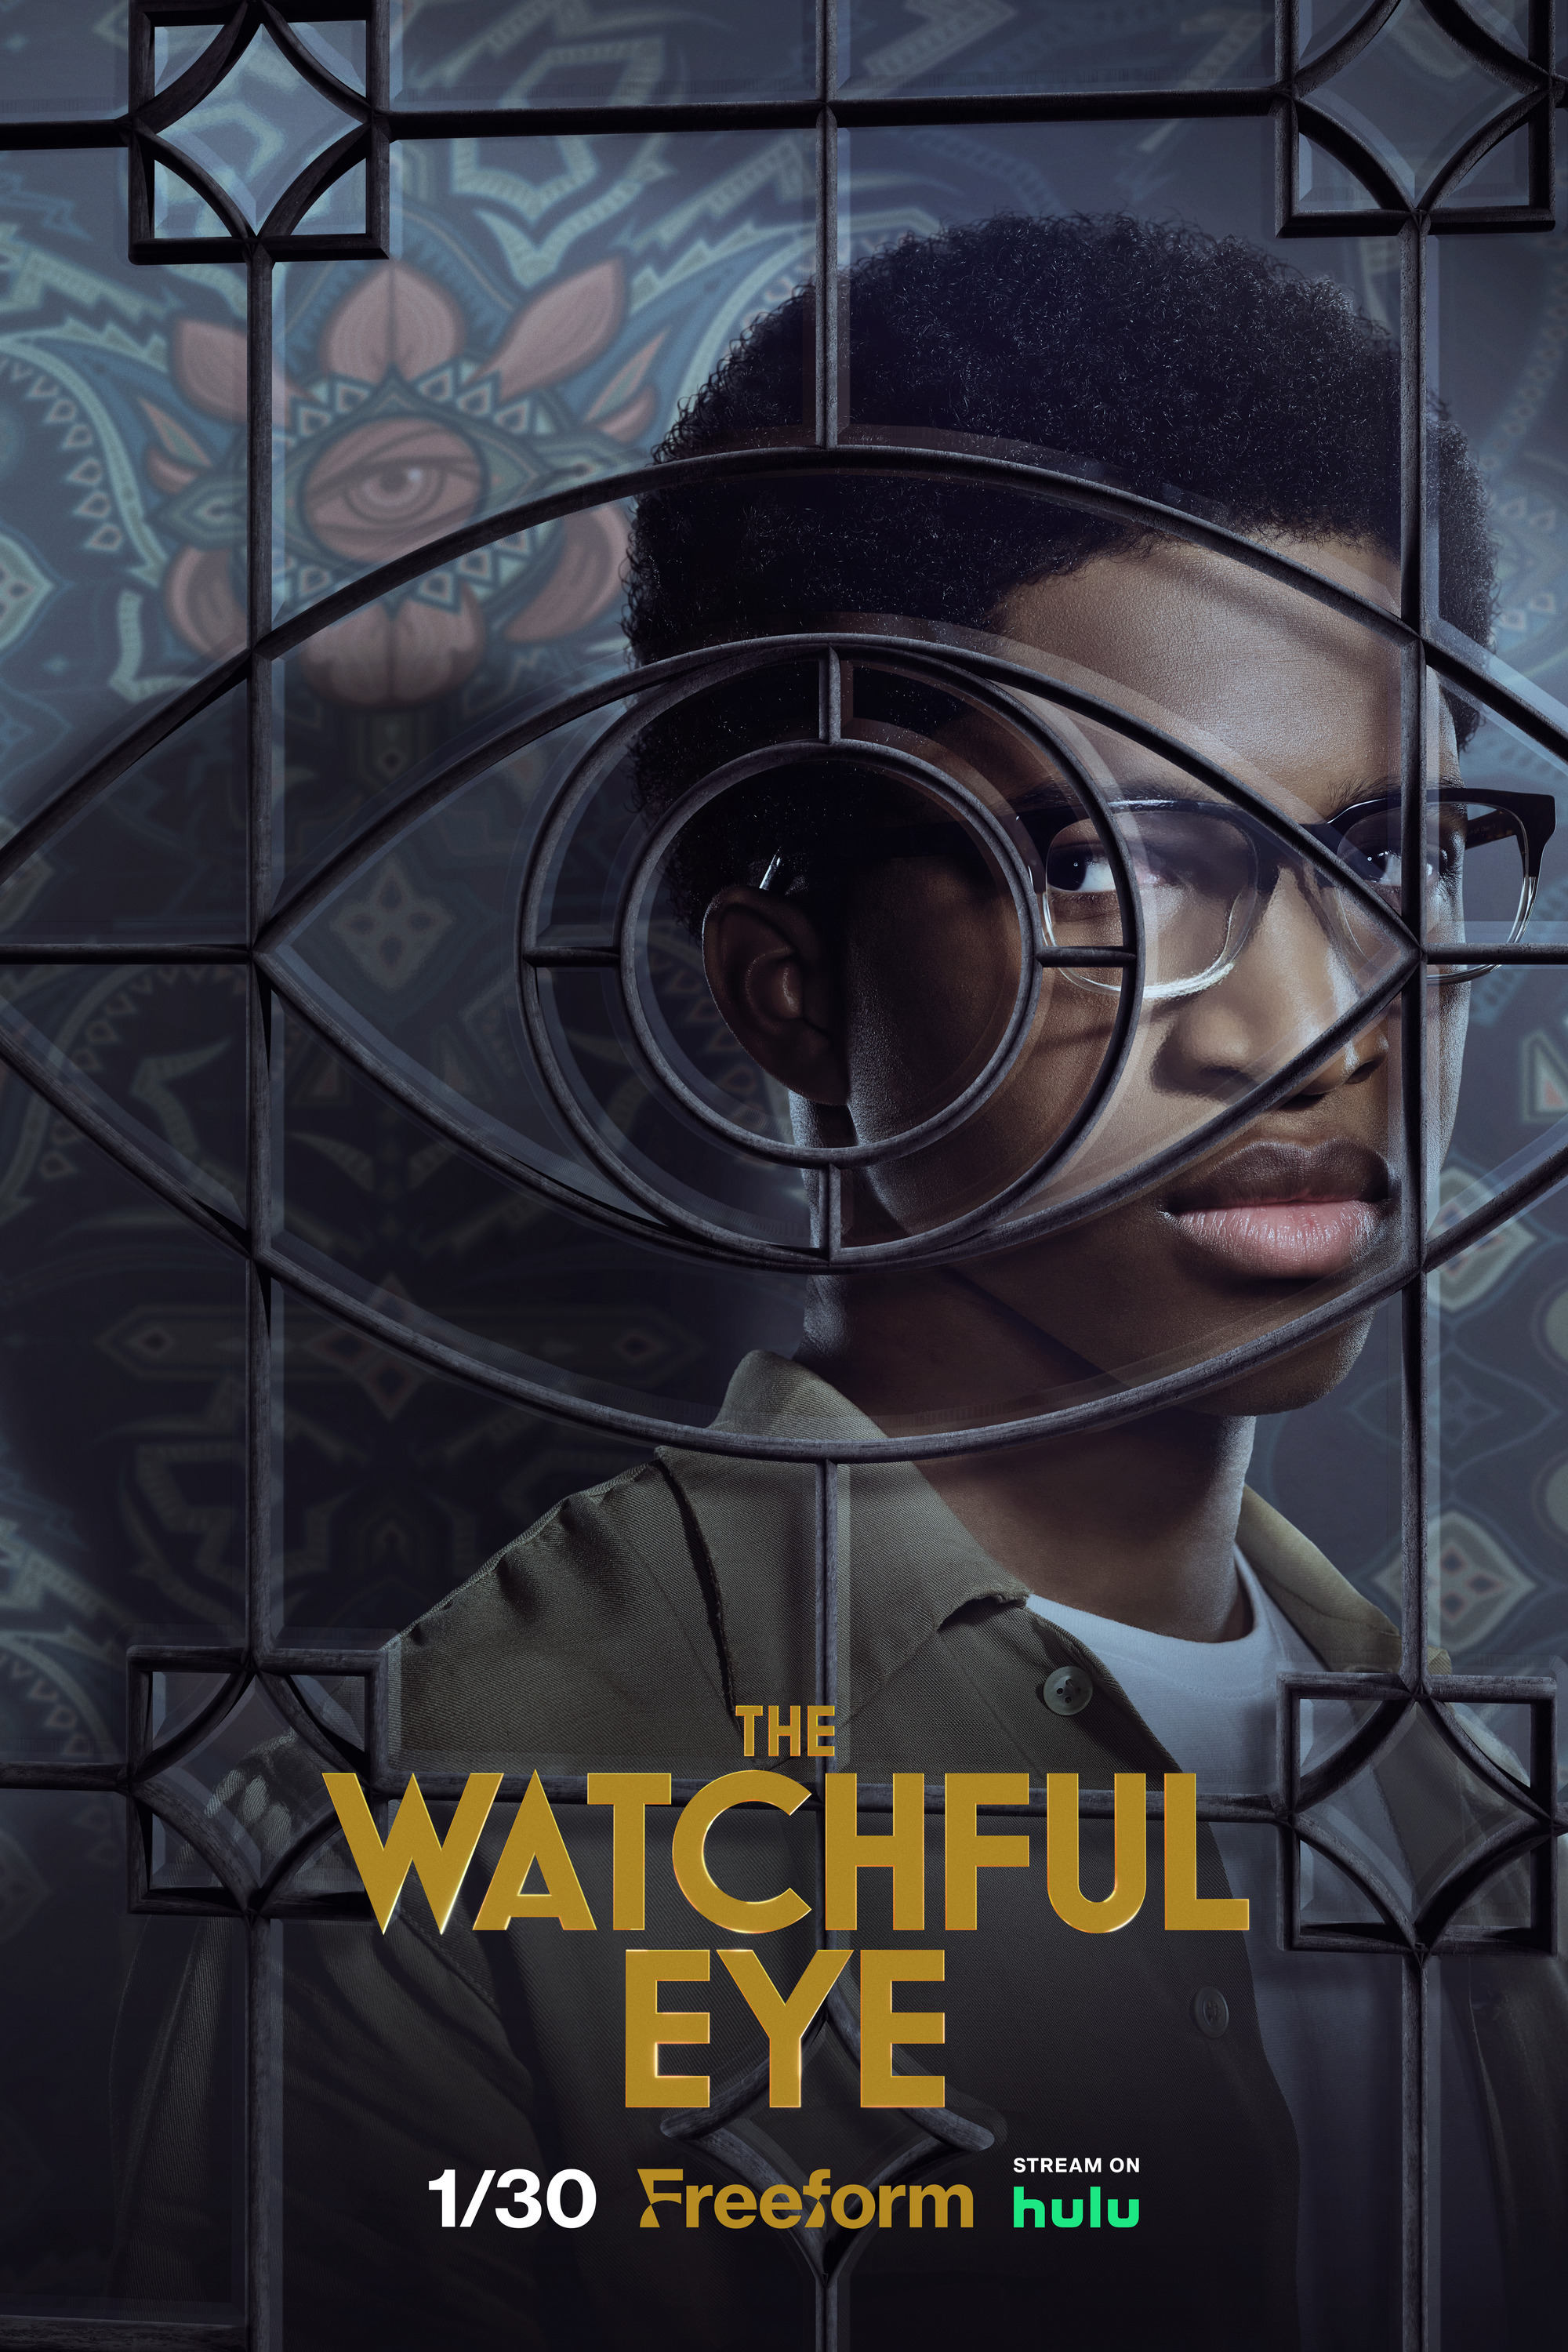 Mega Sized TV Poster Image for The Watchful Eye (#4 of 10)